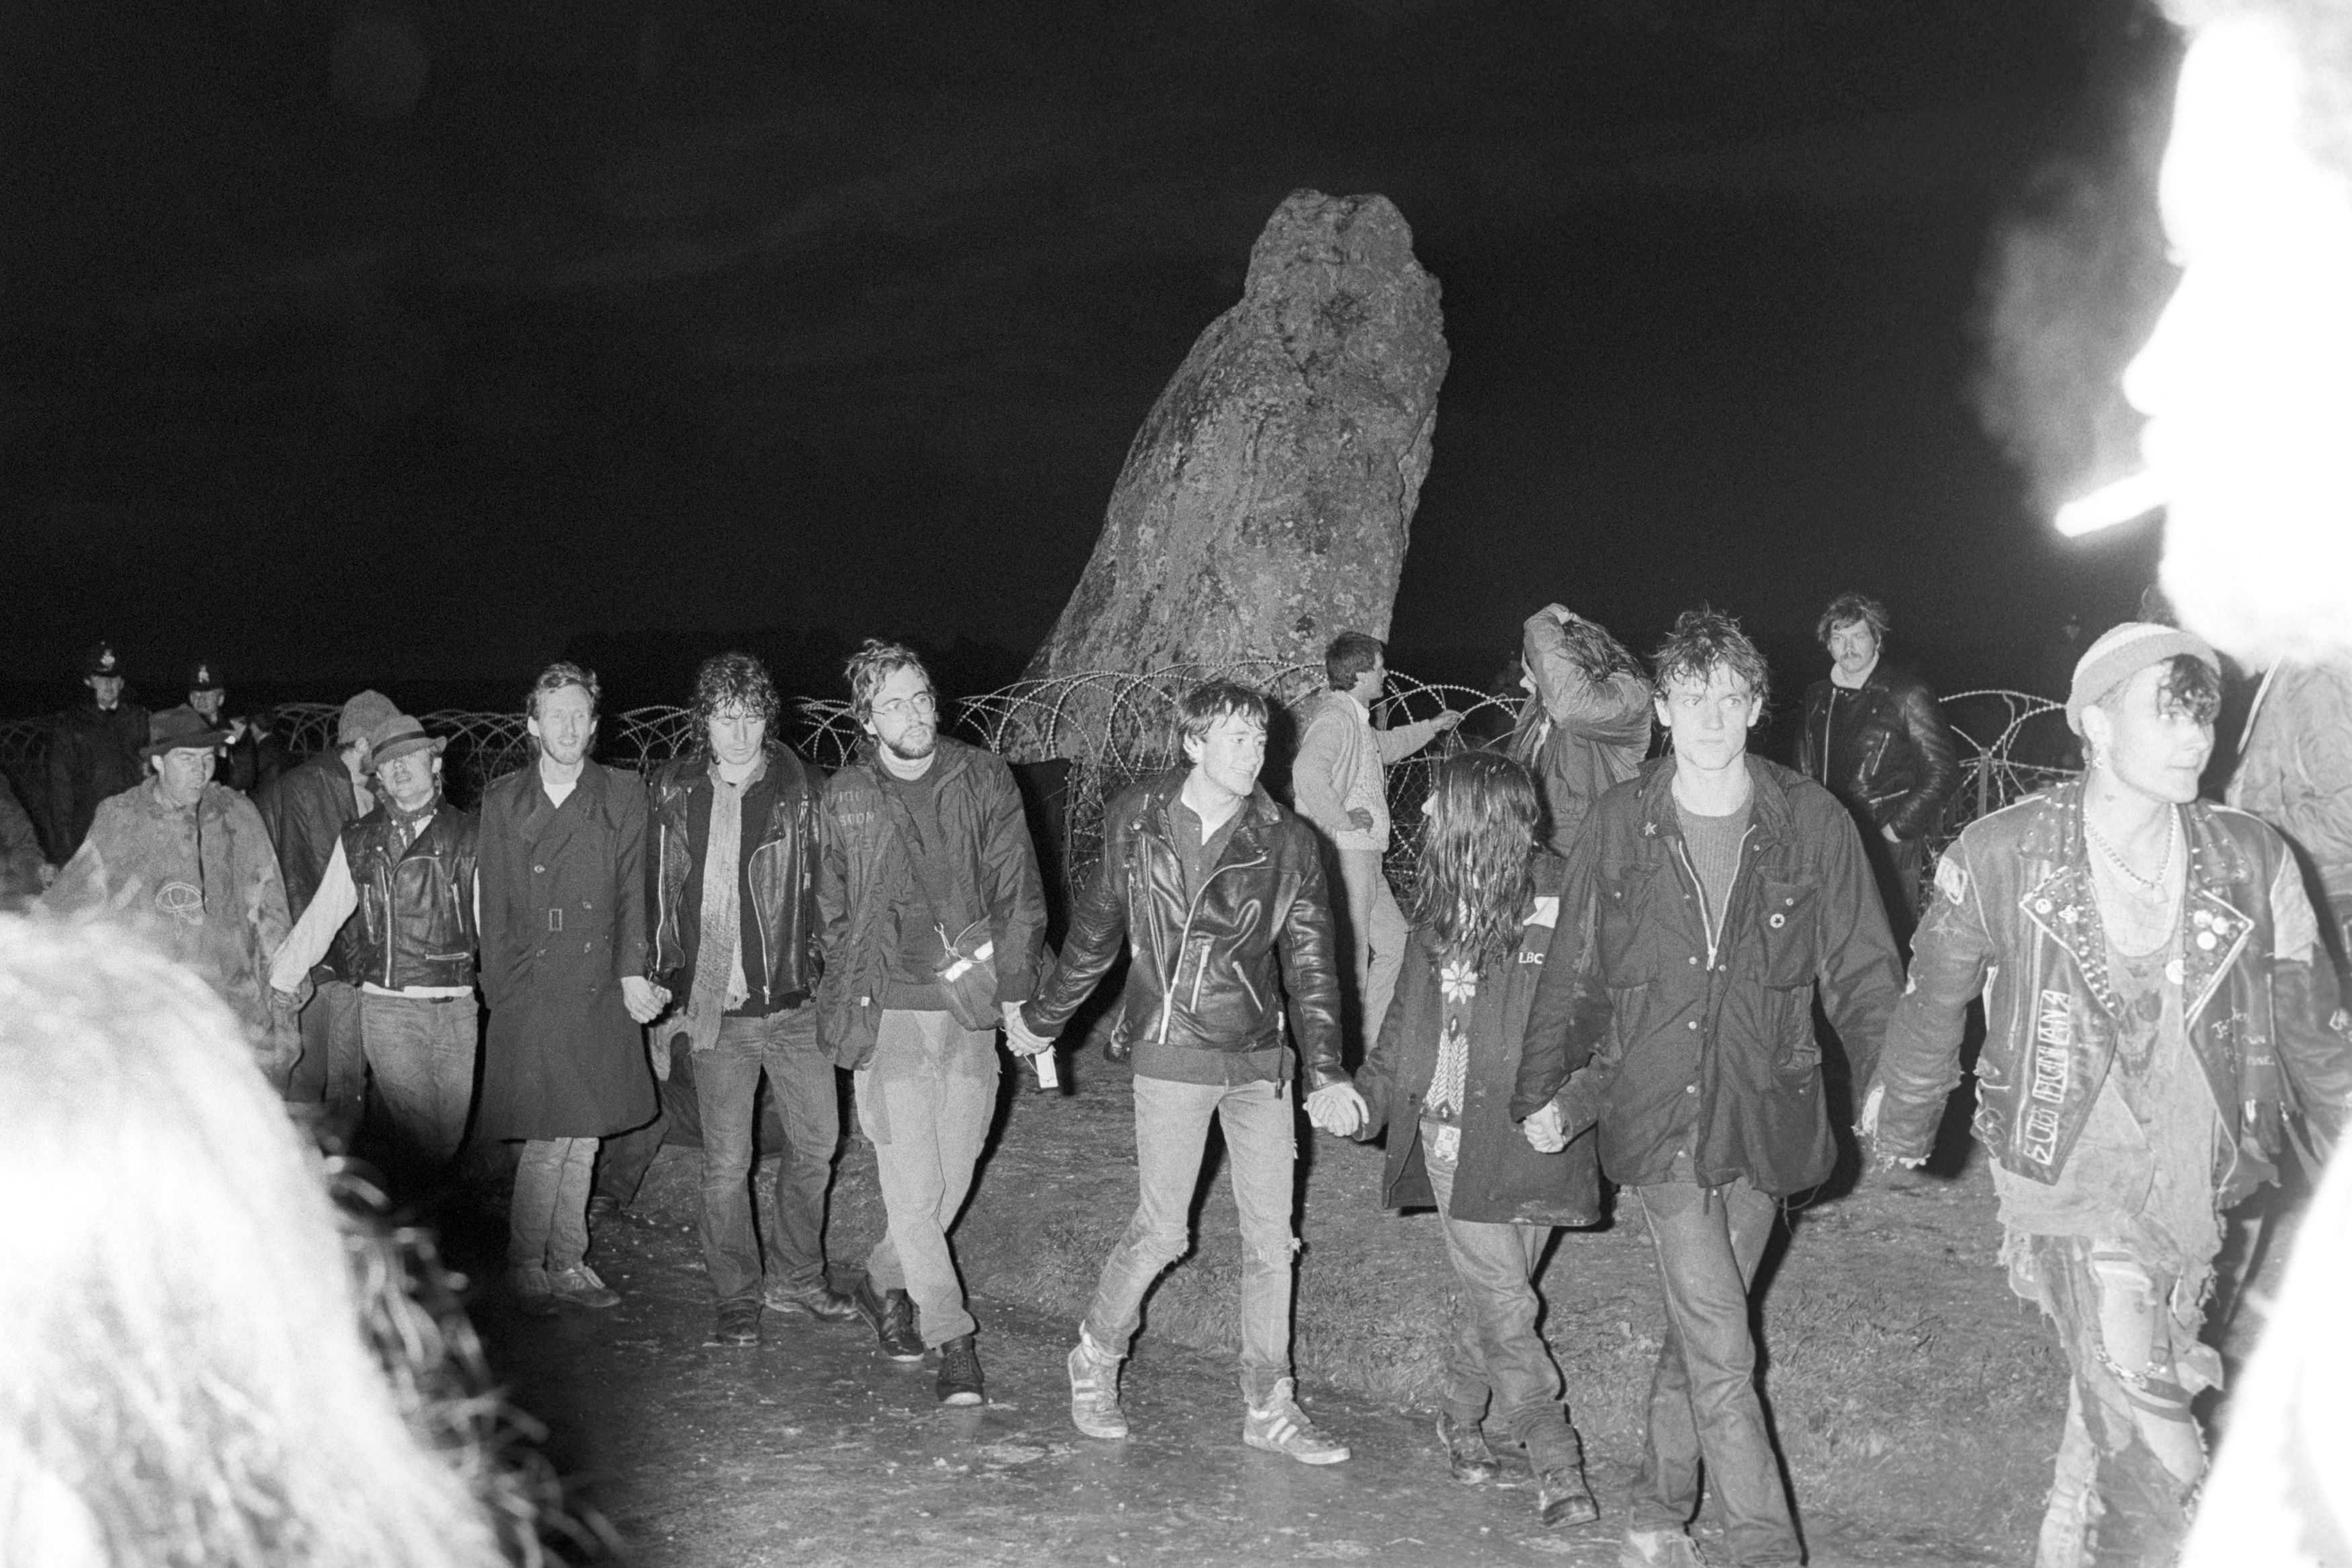 A 1985 photo of people chanting and holding hands ahead of Summer Solstice celebrations at Stonehenge